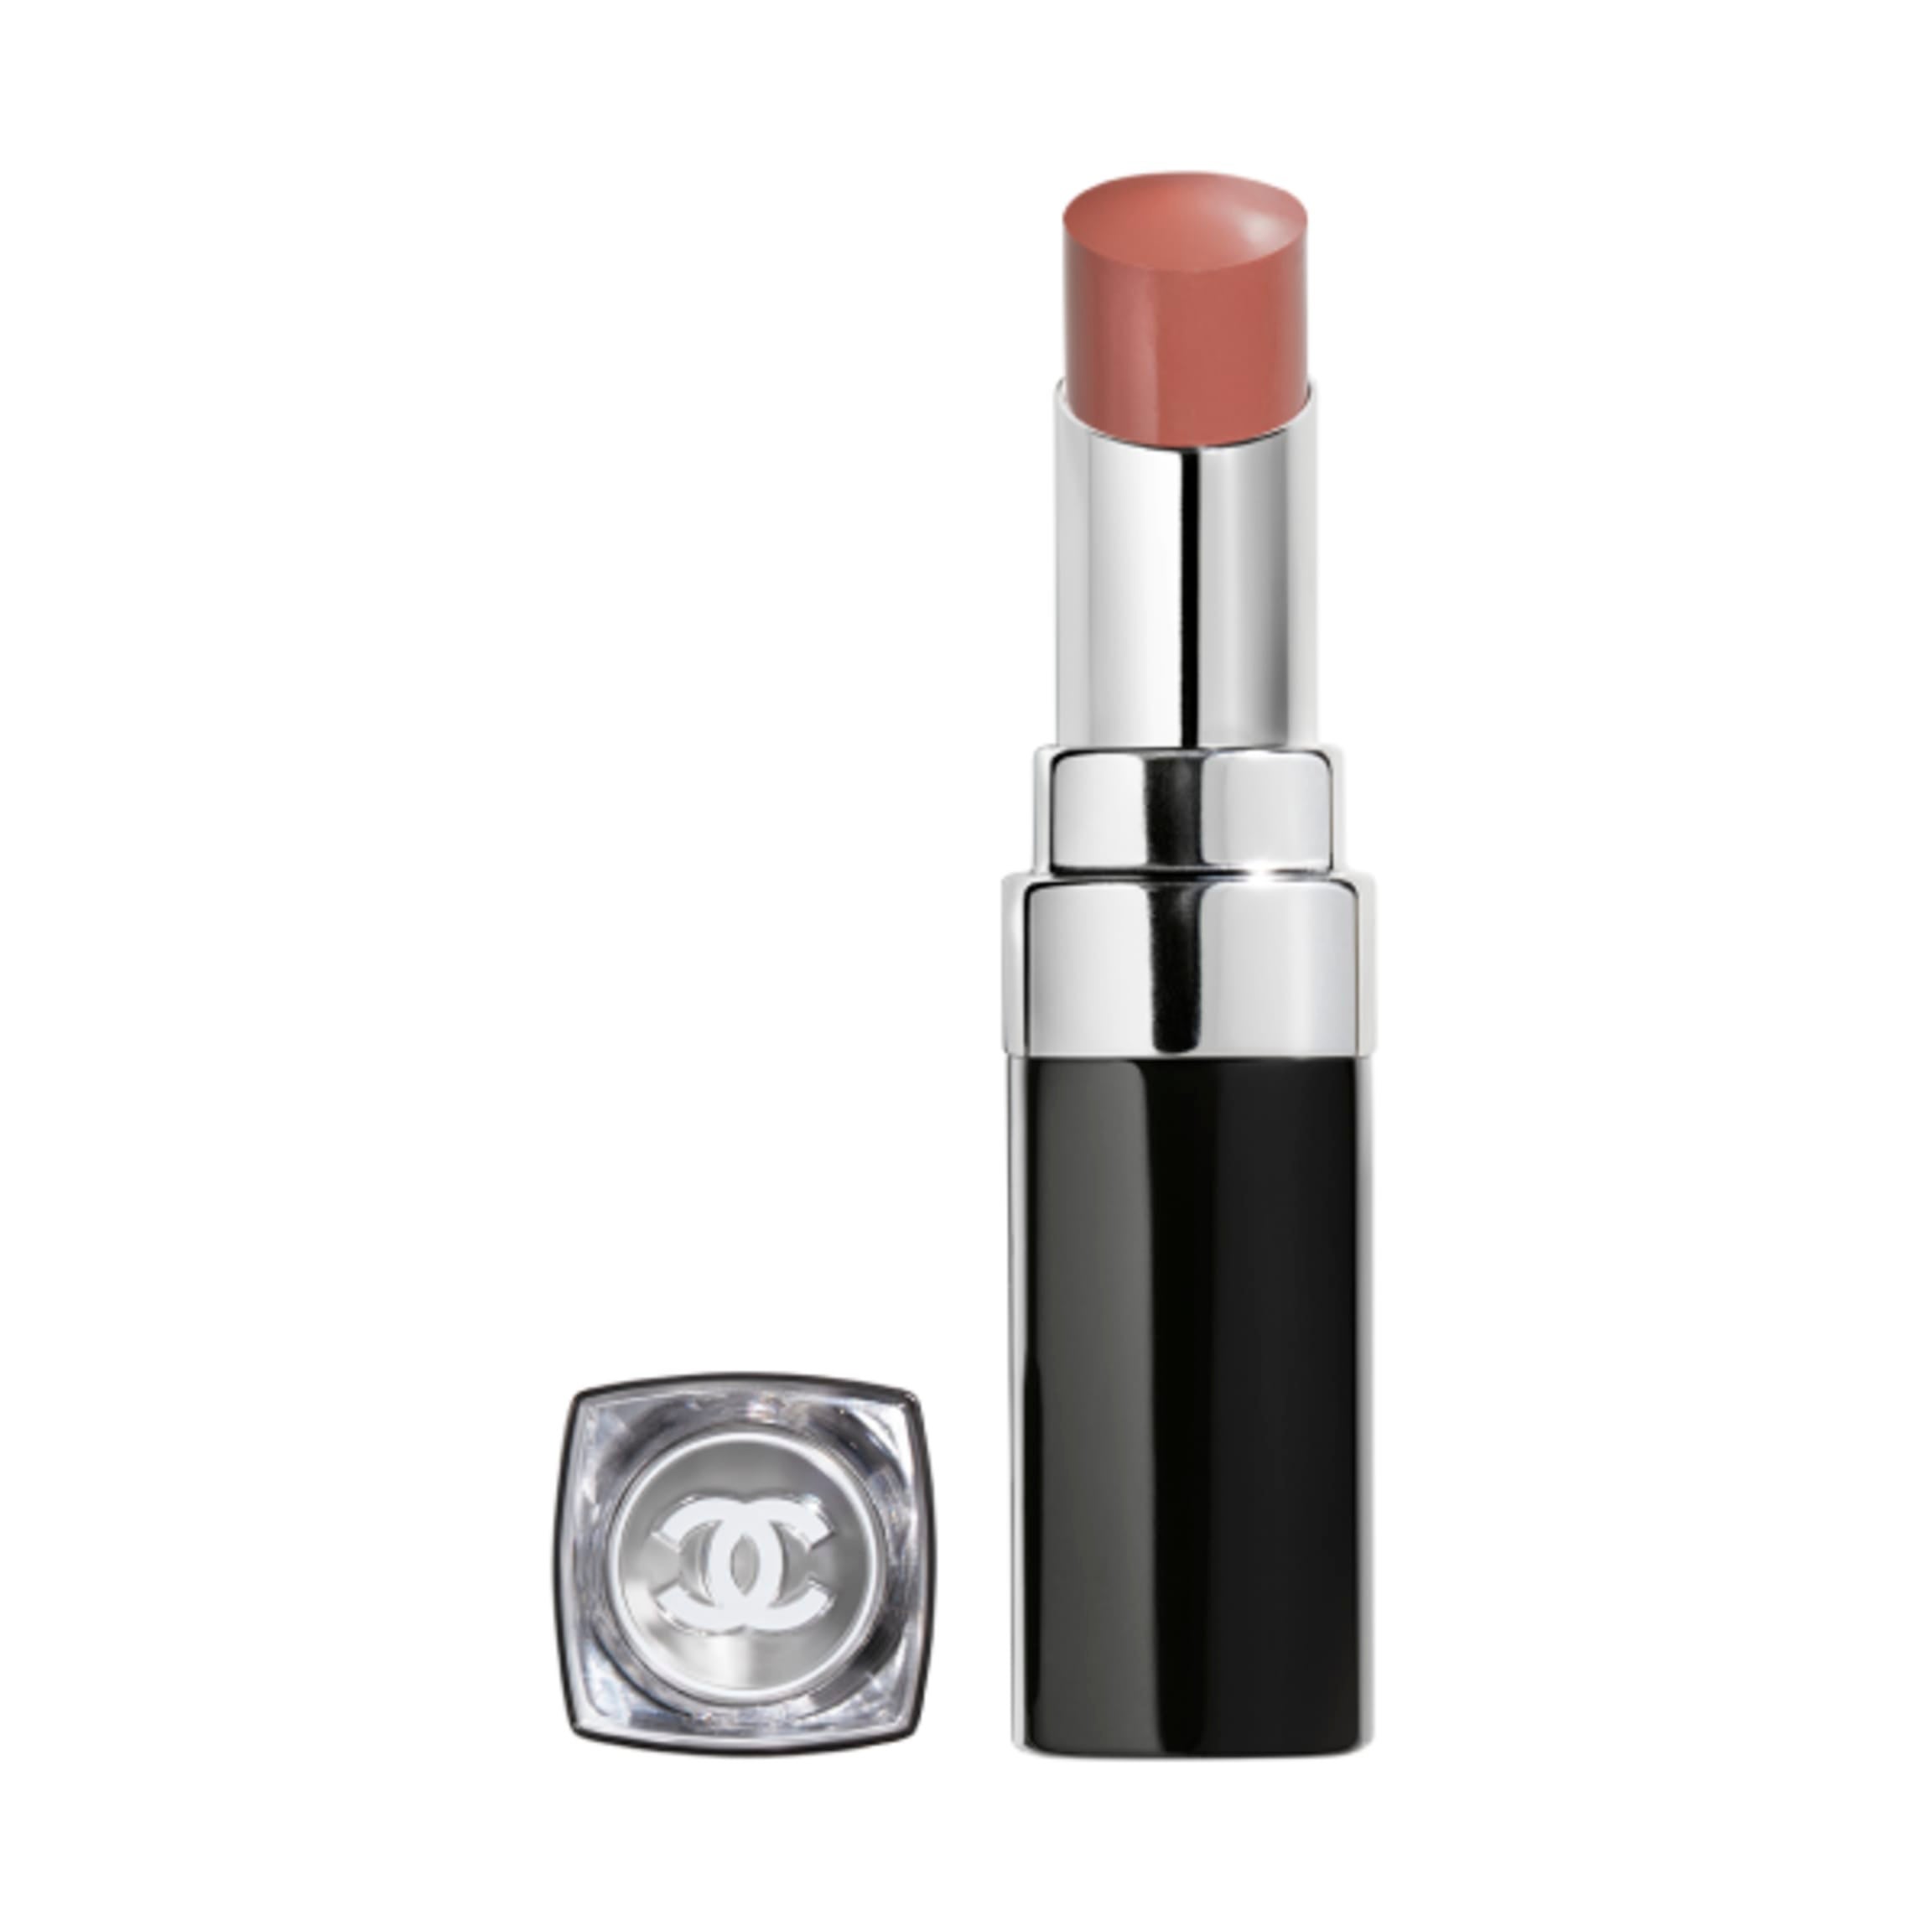 LIPS, Arbonne Intelligence Lip Treatment Review, Cosmetic Proof